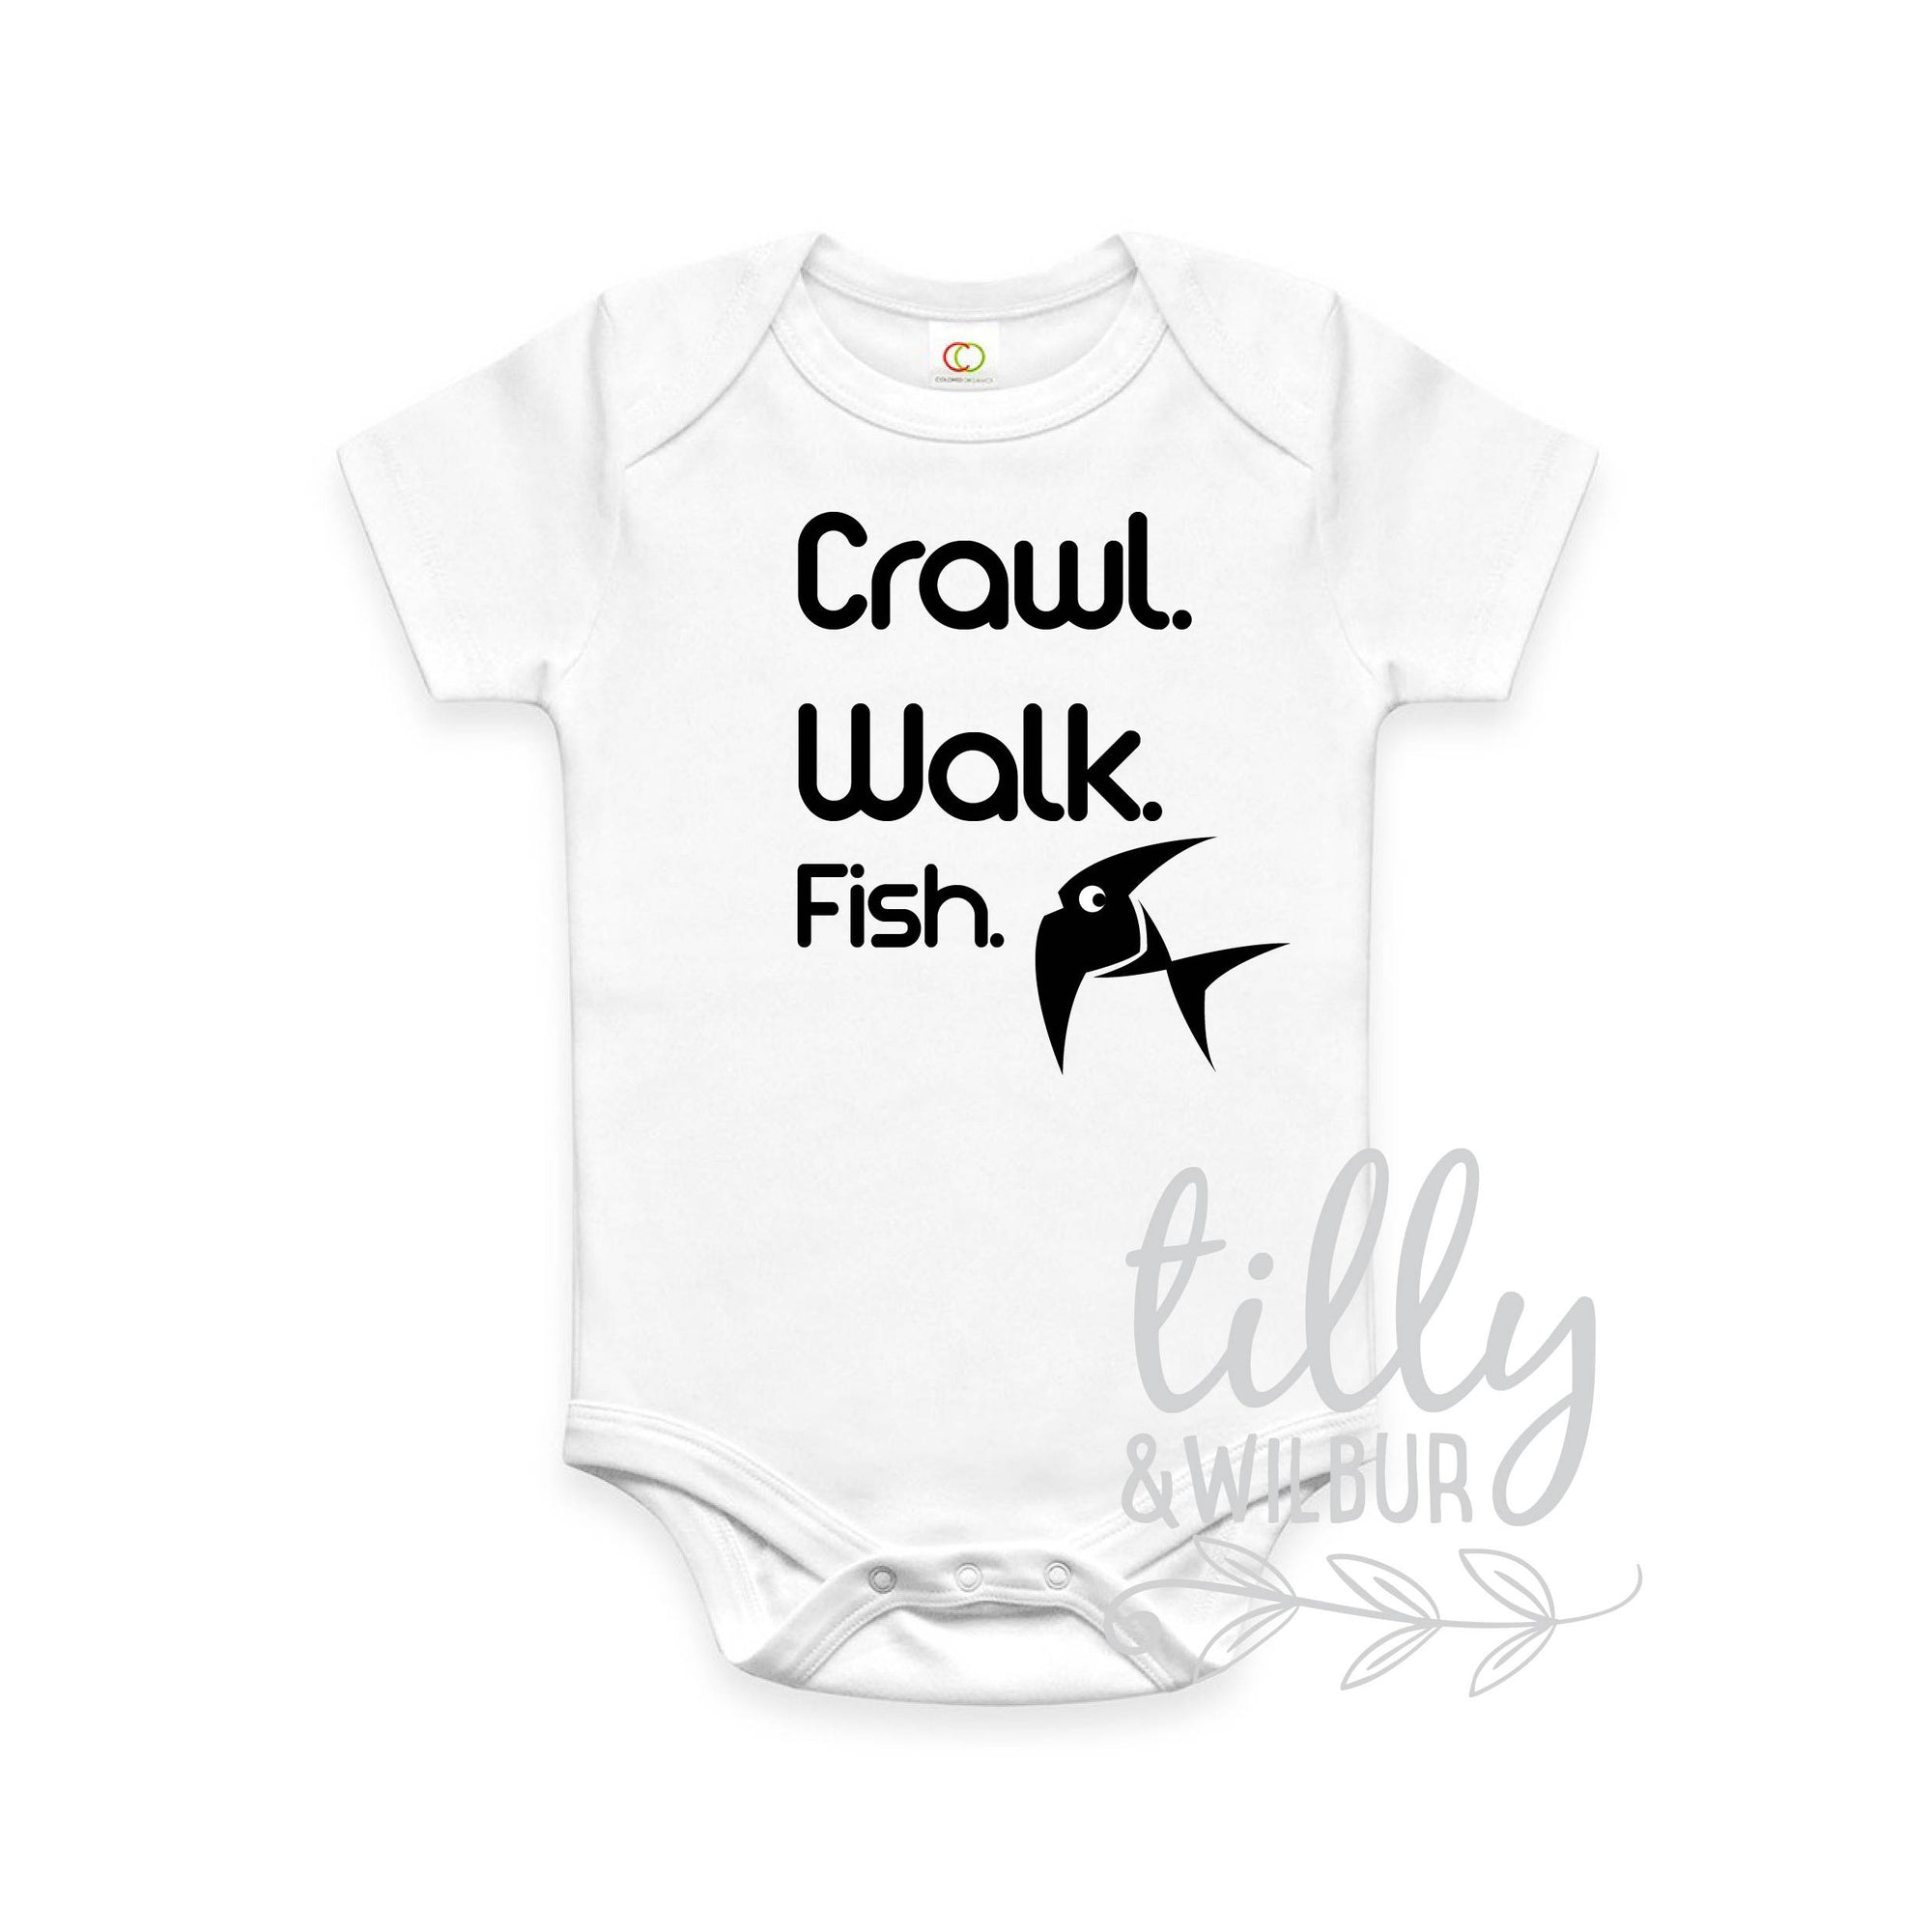 Crawl Walk Fish Baby Bodysuit, Unisex for Girls Or Boys, Fishing Gift, Funny Baby Fishing Outfit, Baby Shower Gift, Nautical Theme, U-W-BS